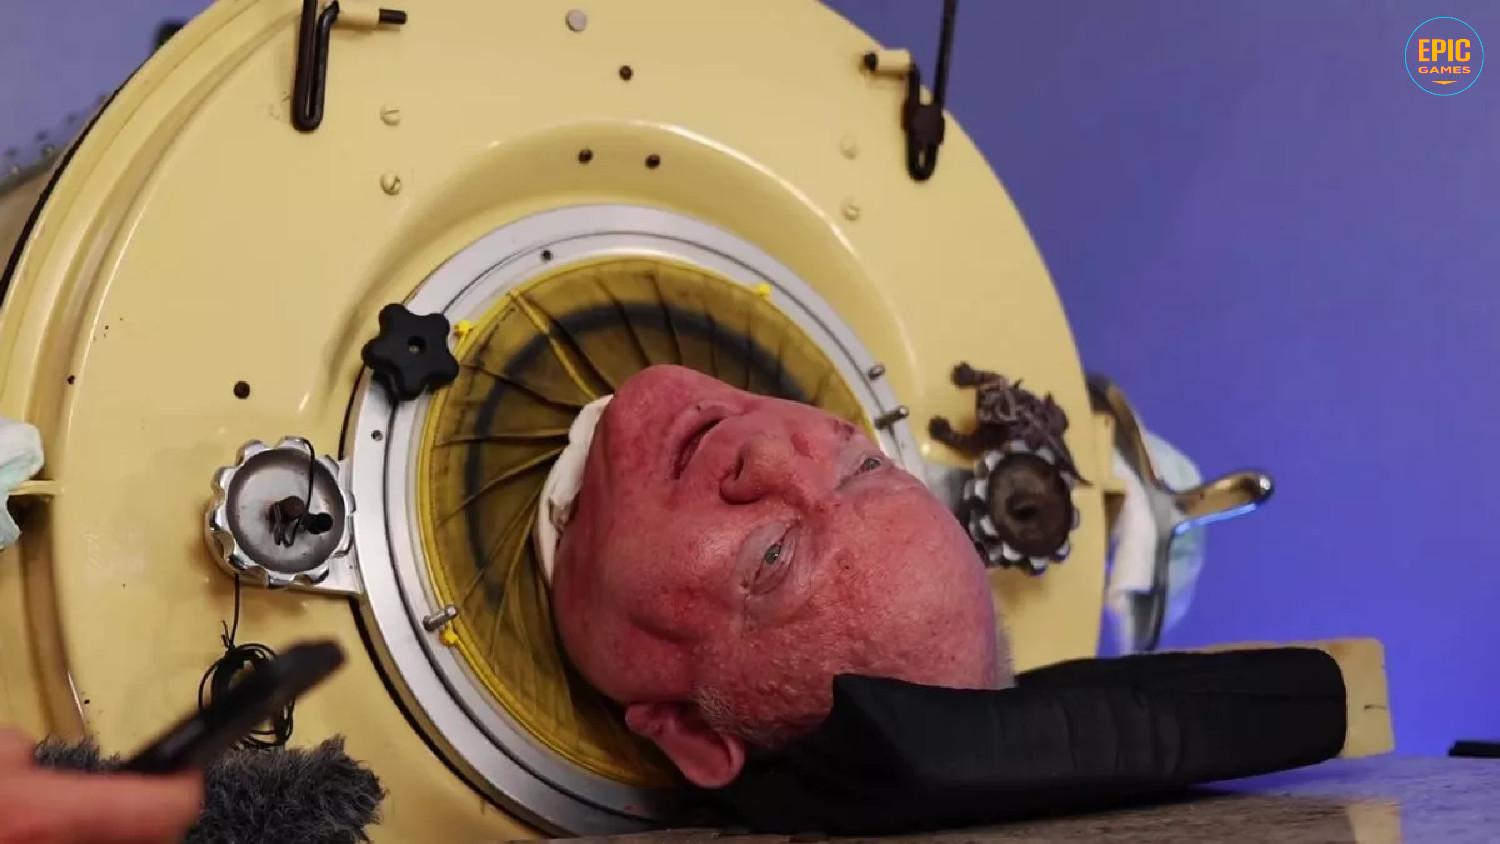 Paul Alexander: 'Man in the iron lung' dies at the age of 78